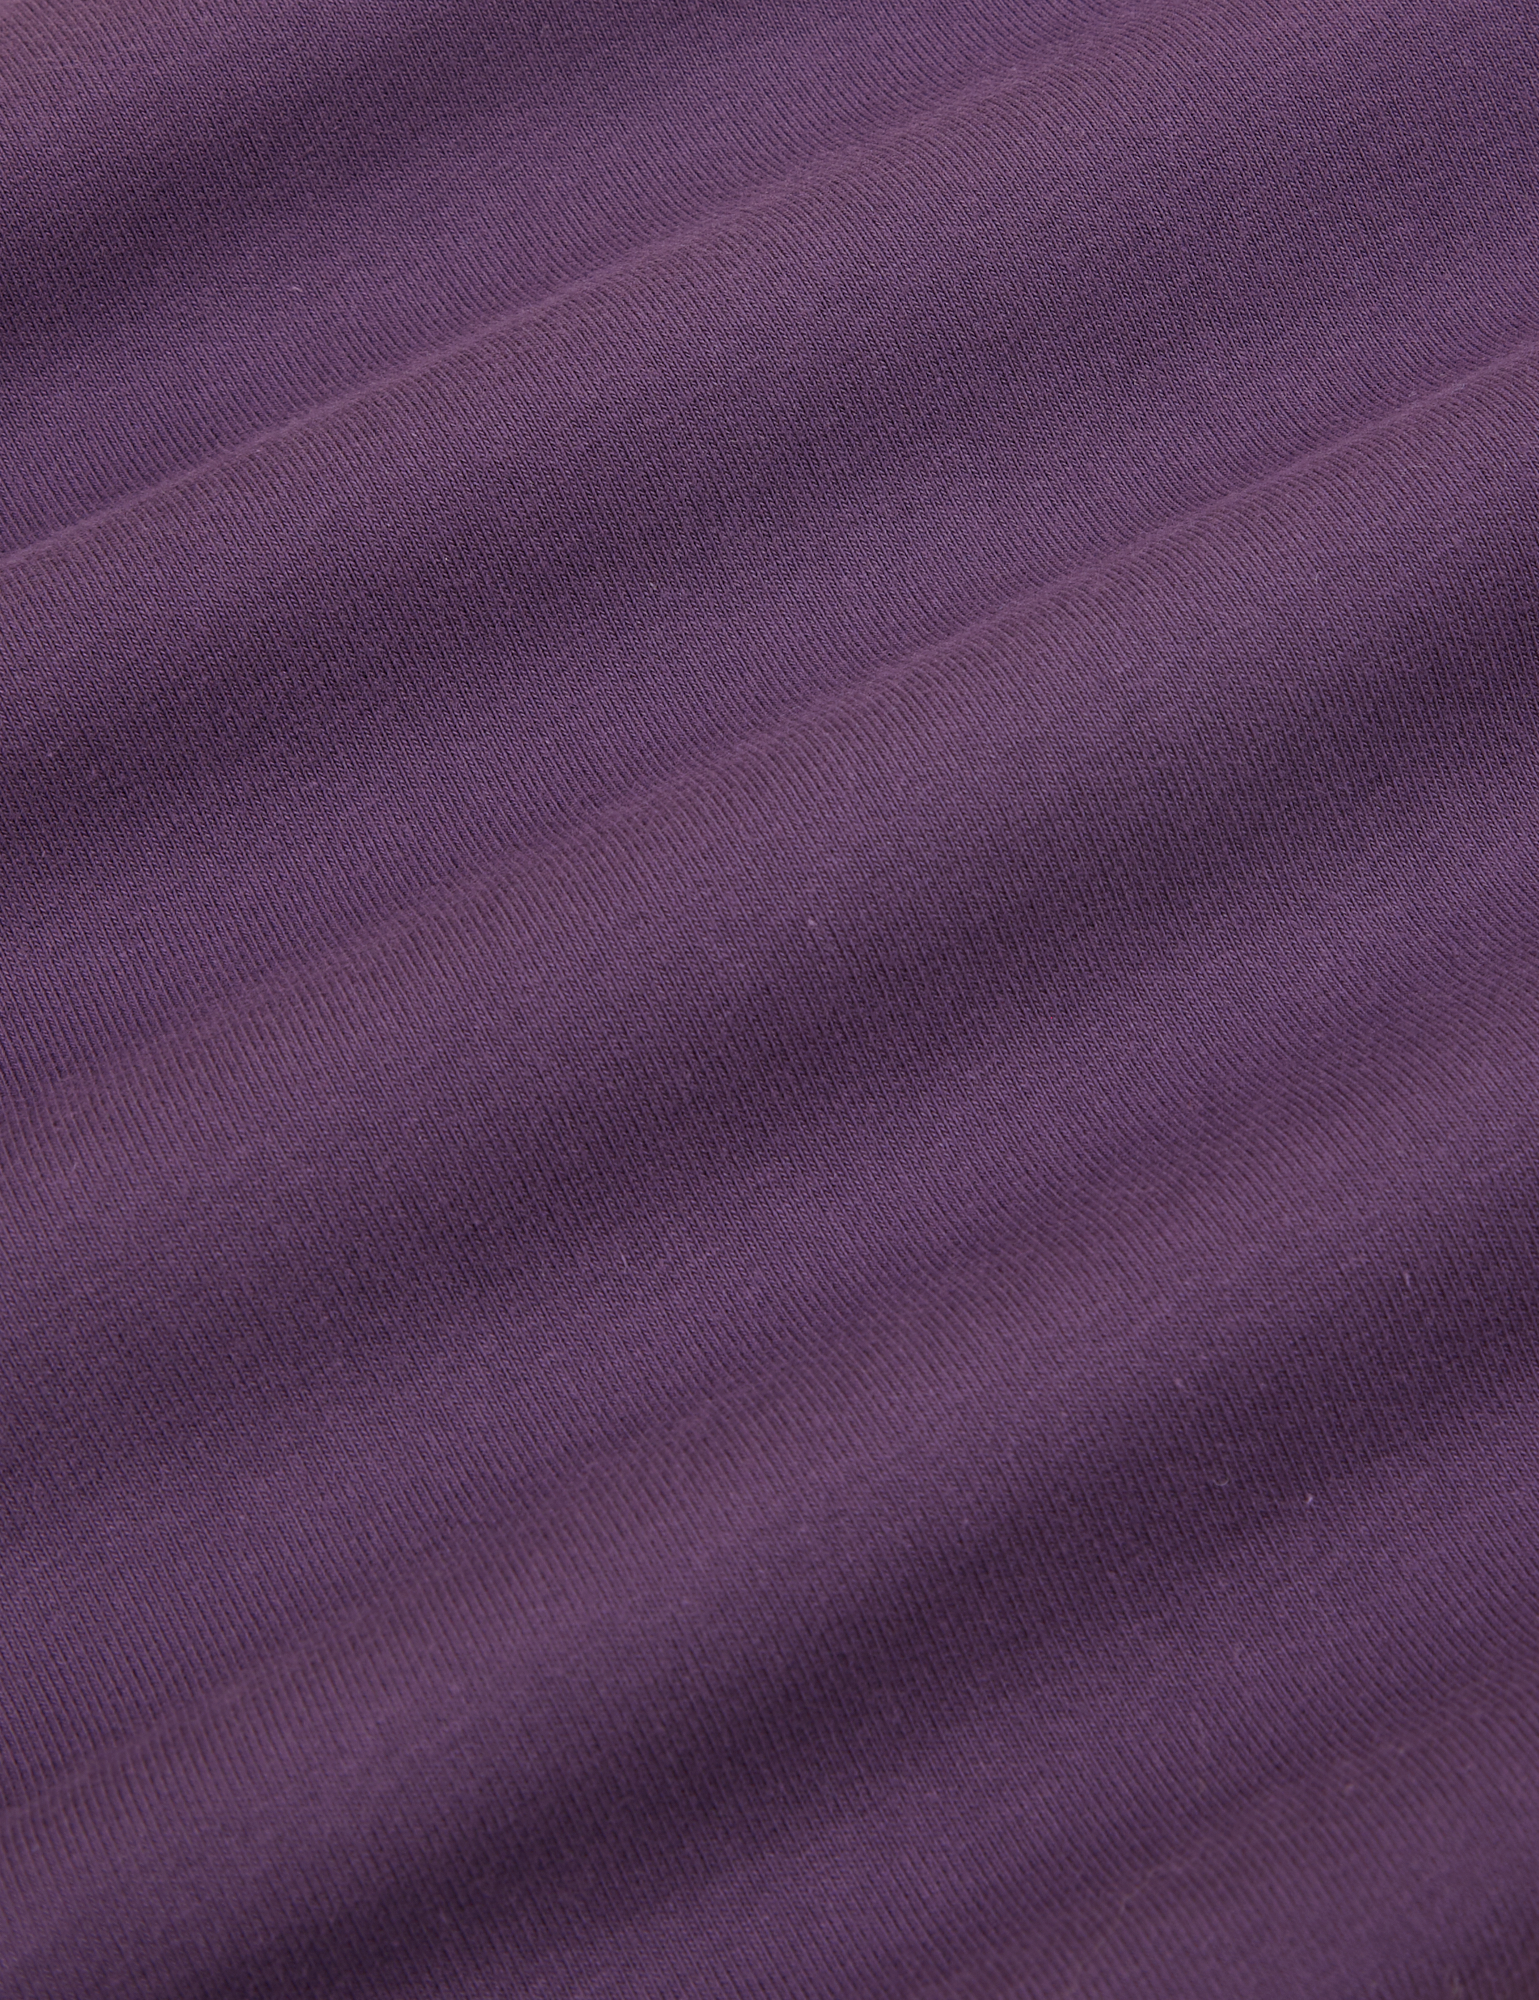 Cropped Tank Top in Nebula Purple fabric detail close up